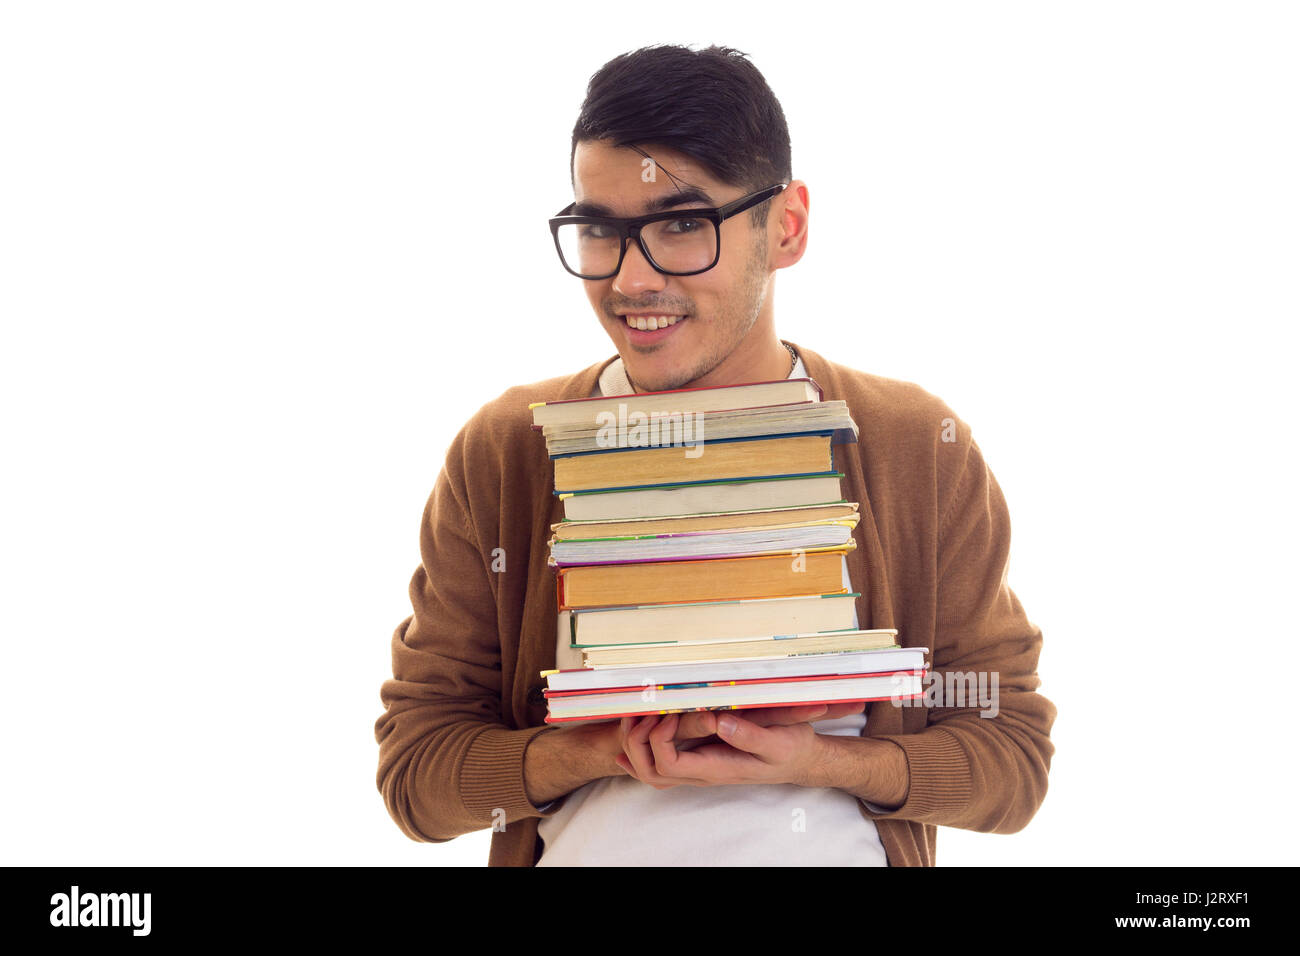 Young man in glasses with books Stock Photo